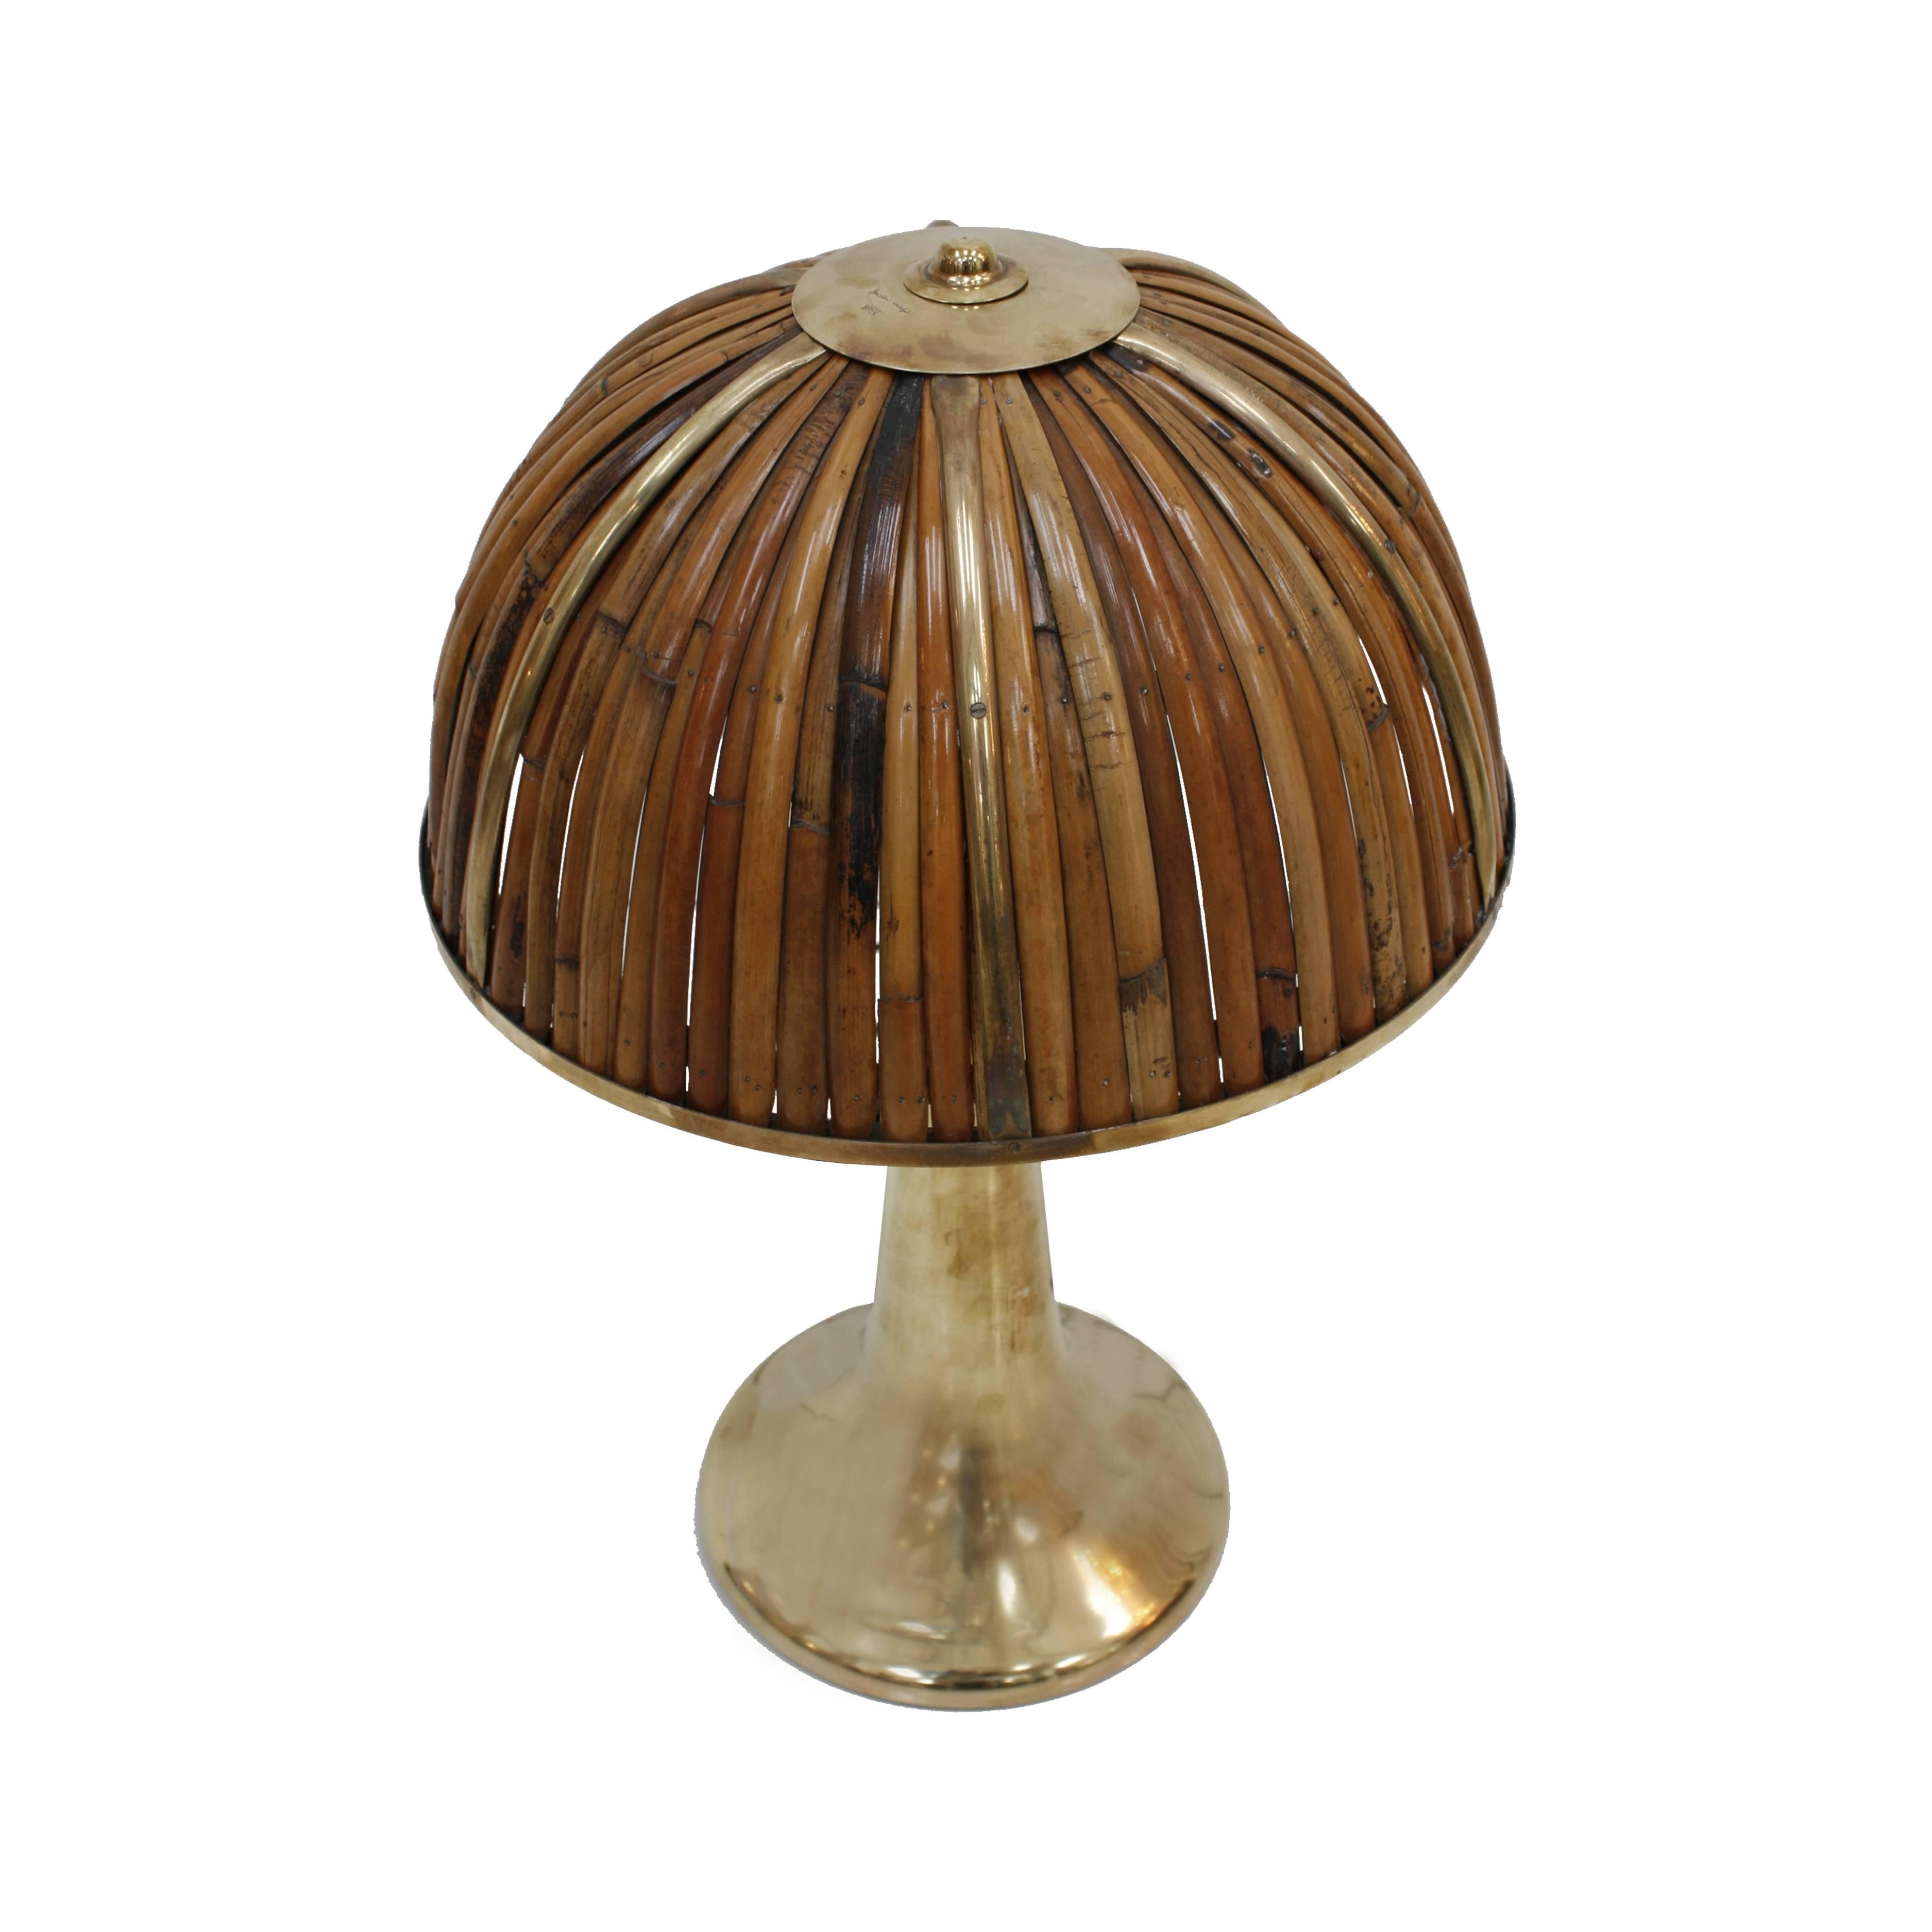 Signed table lamp model 